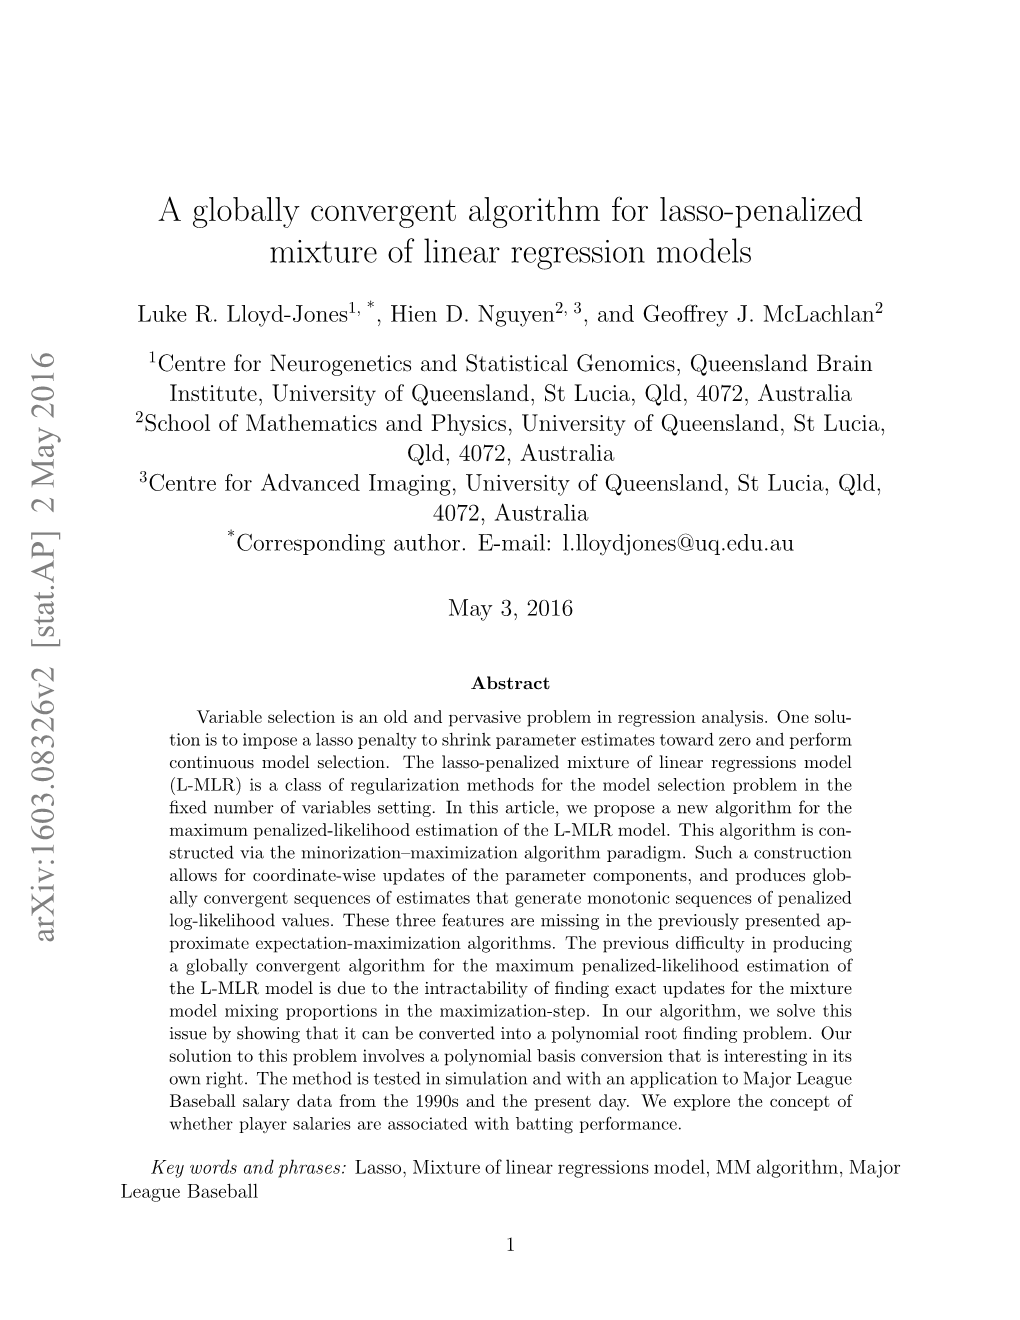 A Globally Convergent Algorithm for Lasso-Penalized Mixture of Linear Regression Models